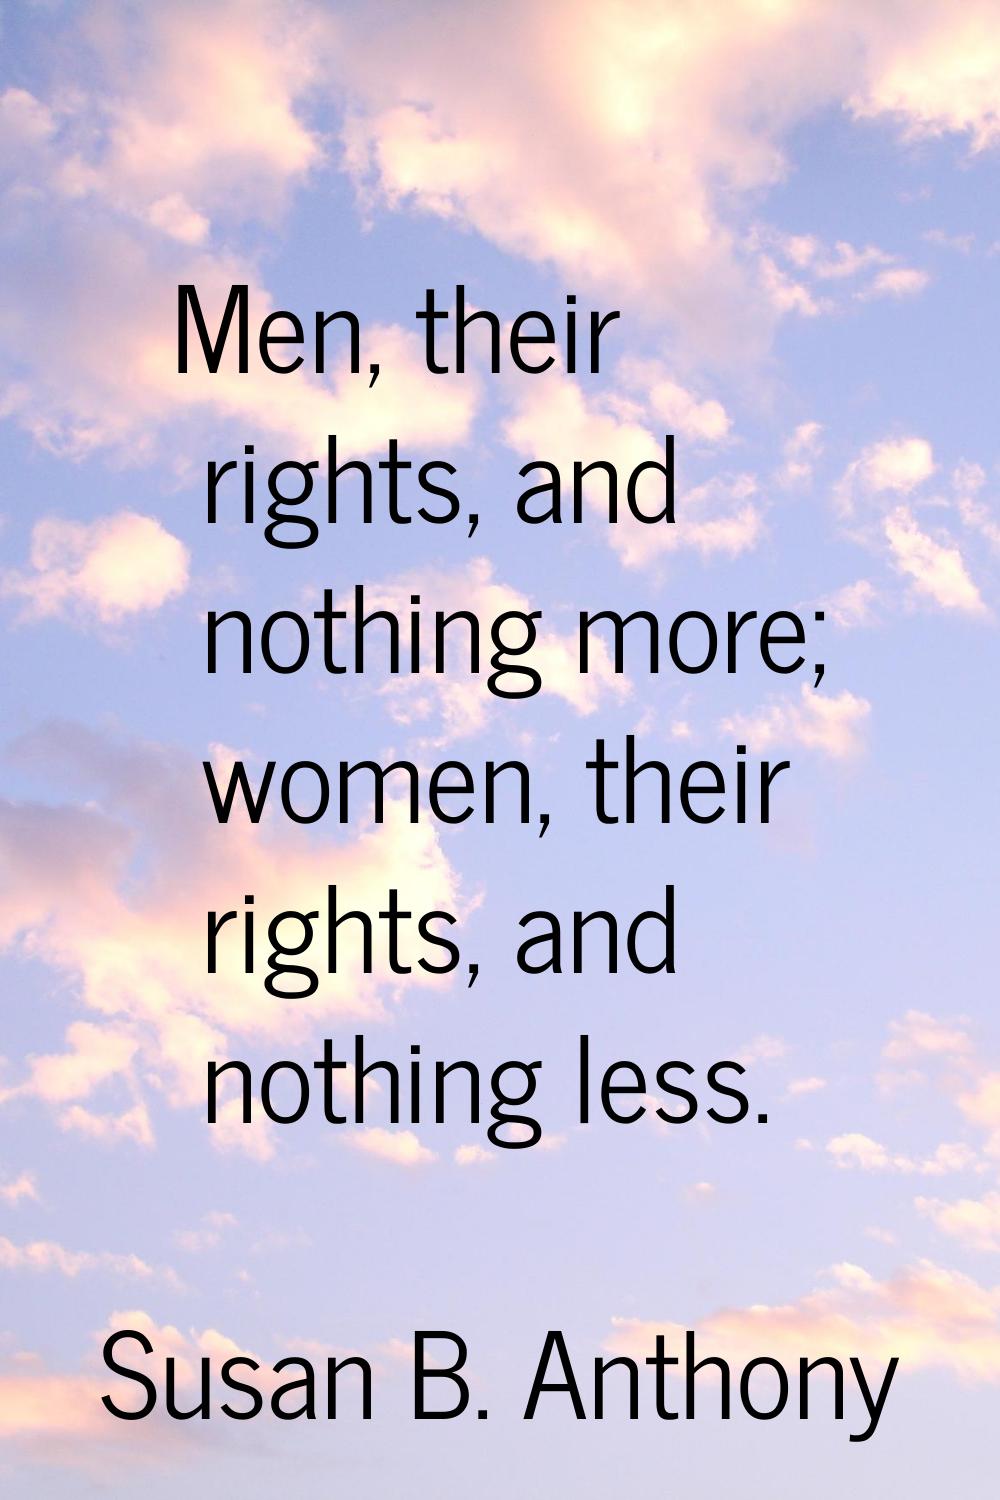 Men, their rights, and nothing more; women, their rights, and nothing less.